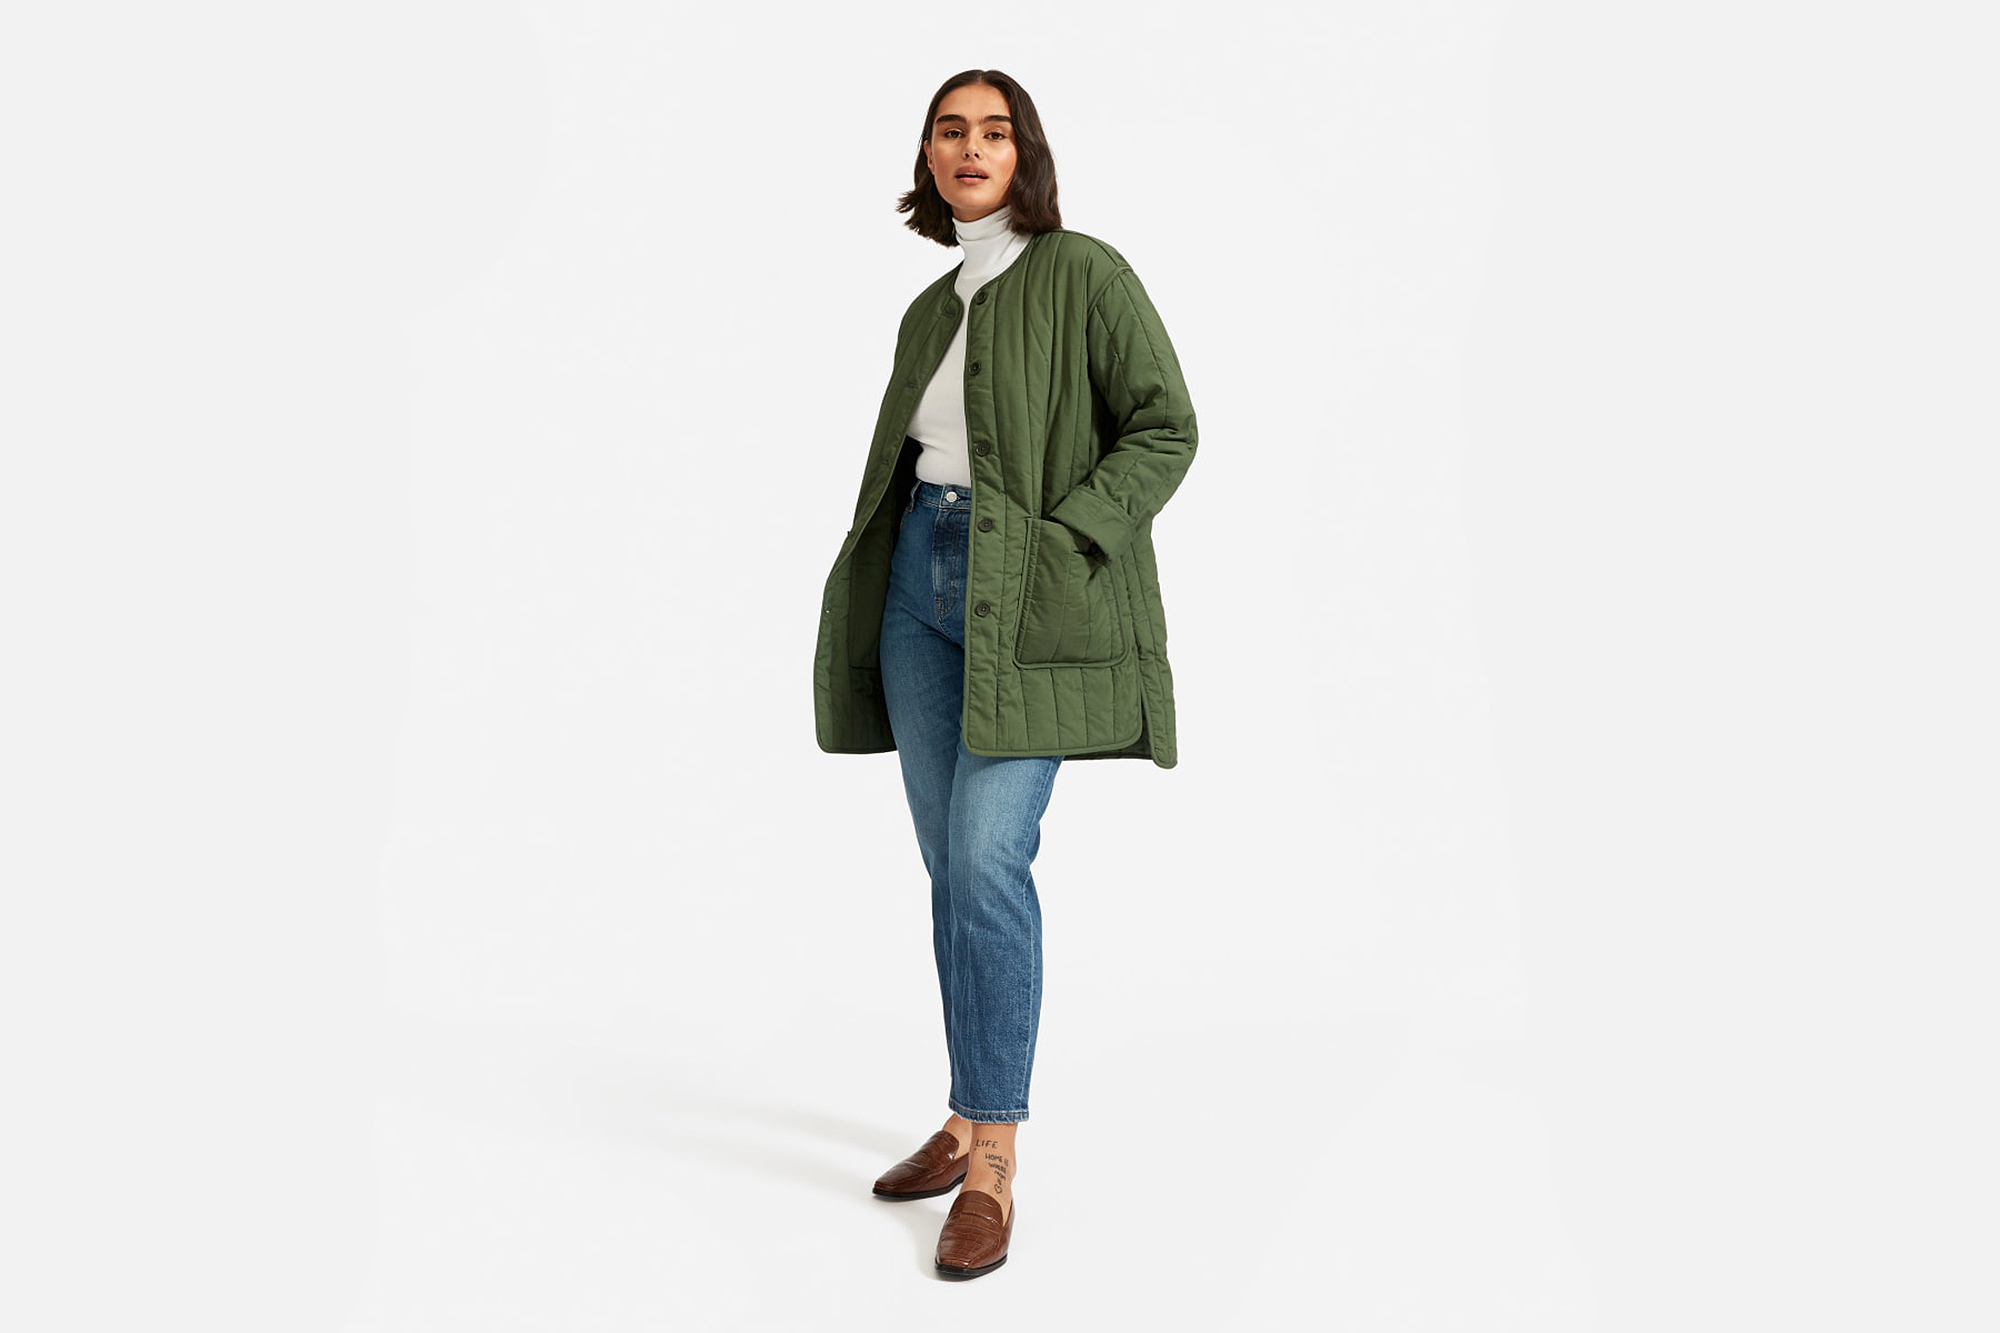 Everlane Cotton Quilted Jacket Is an Effortless Outfit-Maker